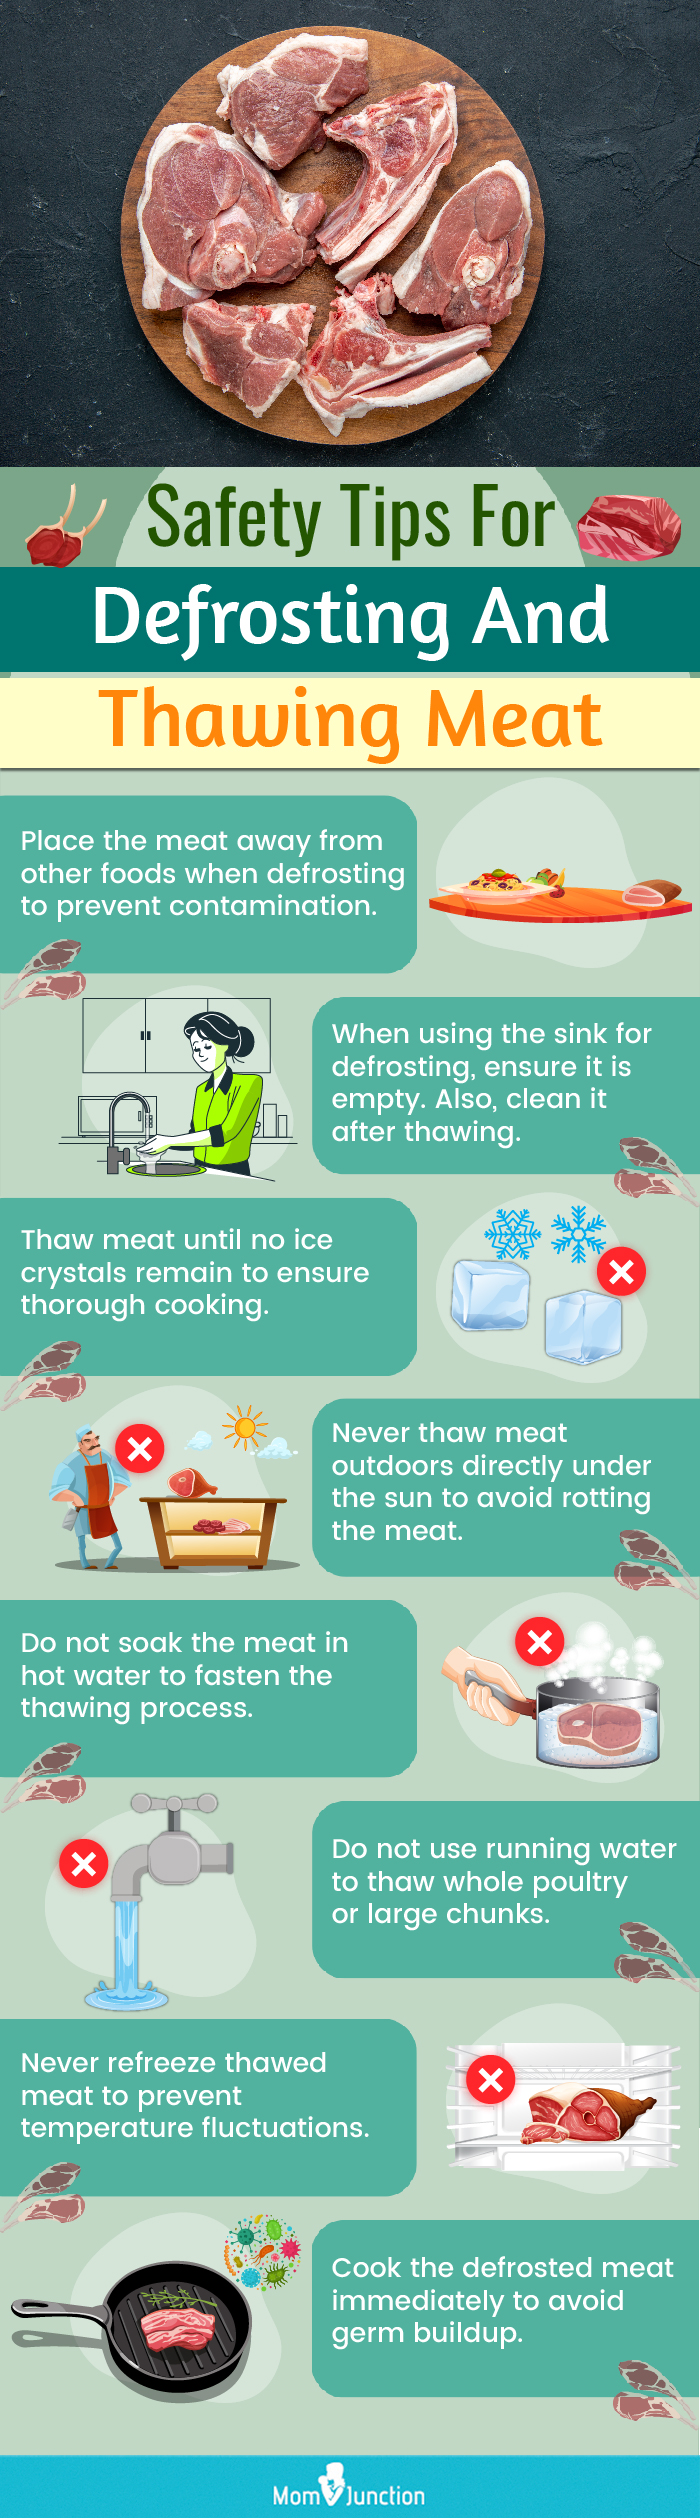 Safety Tips For Defrosting And Thawing Meat (infographic)